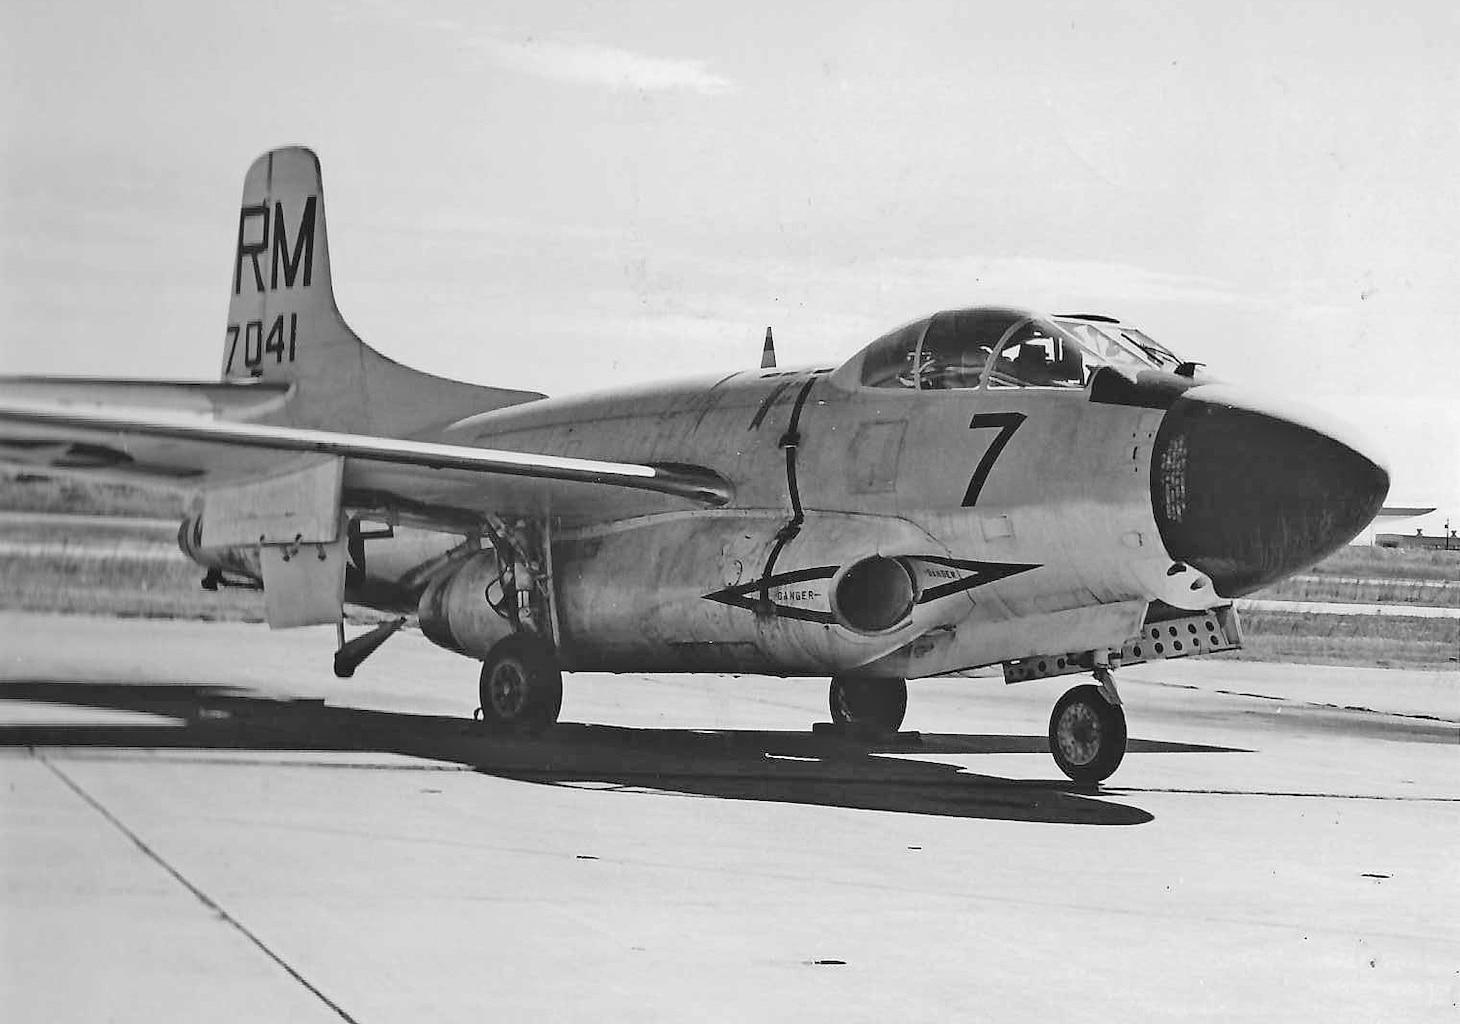 A view of a then-F3D Skyknight of Marine Composite Reconnaissance Squadron (VMCJ) 1 taken in December 1959. The aircraft was assigned to Marine Aircraft Group 12. By this time, the Navy and Marine Corps had transitioned to the overall gull grey color scheme from the WWII era Navy sea blue color. The Marines flew their Skyknights in these colors throughout Vietnam. VMCJ-1 eventually flew more than 25,000 combat sorties, involving more than 52,000 flight hours in Vietnam.